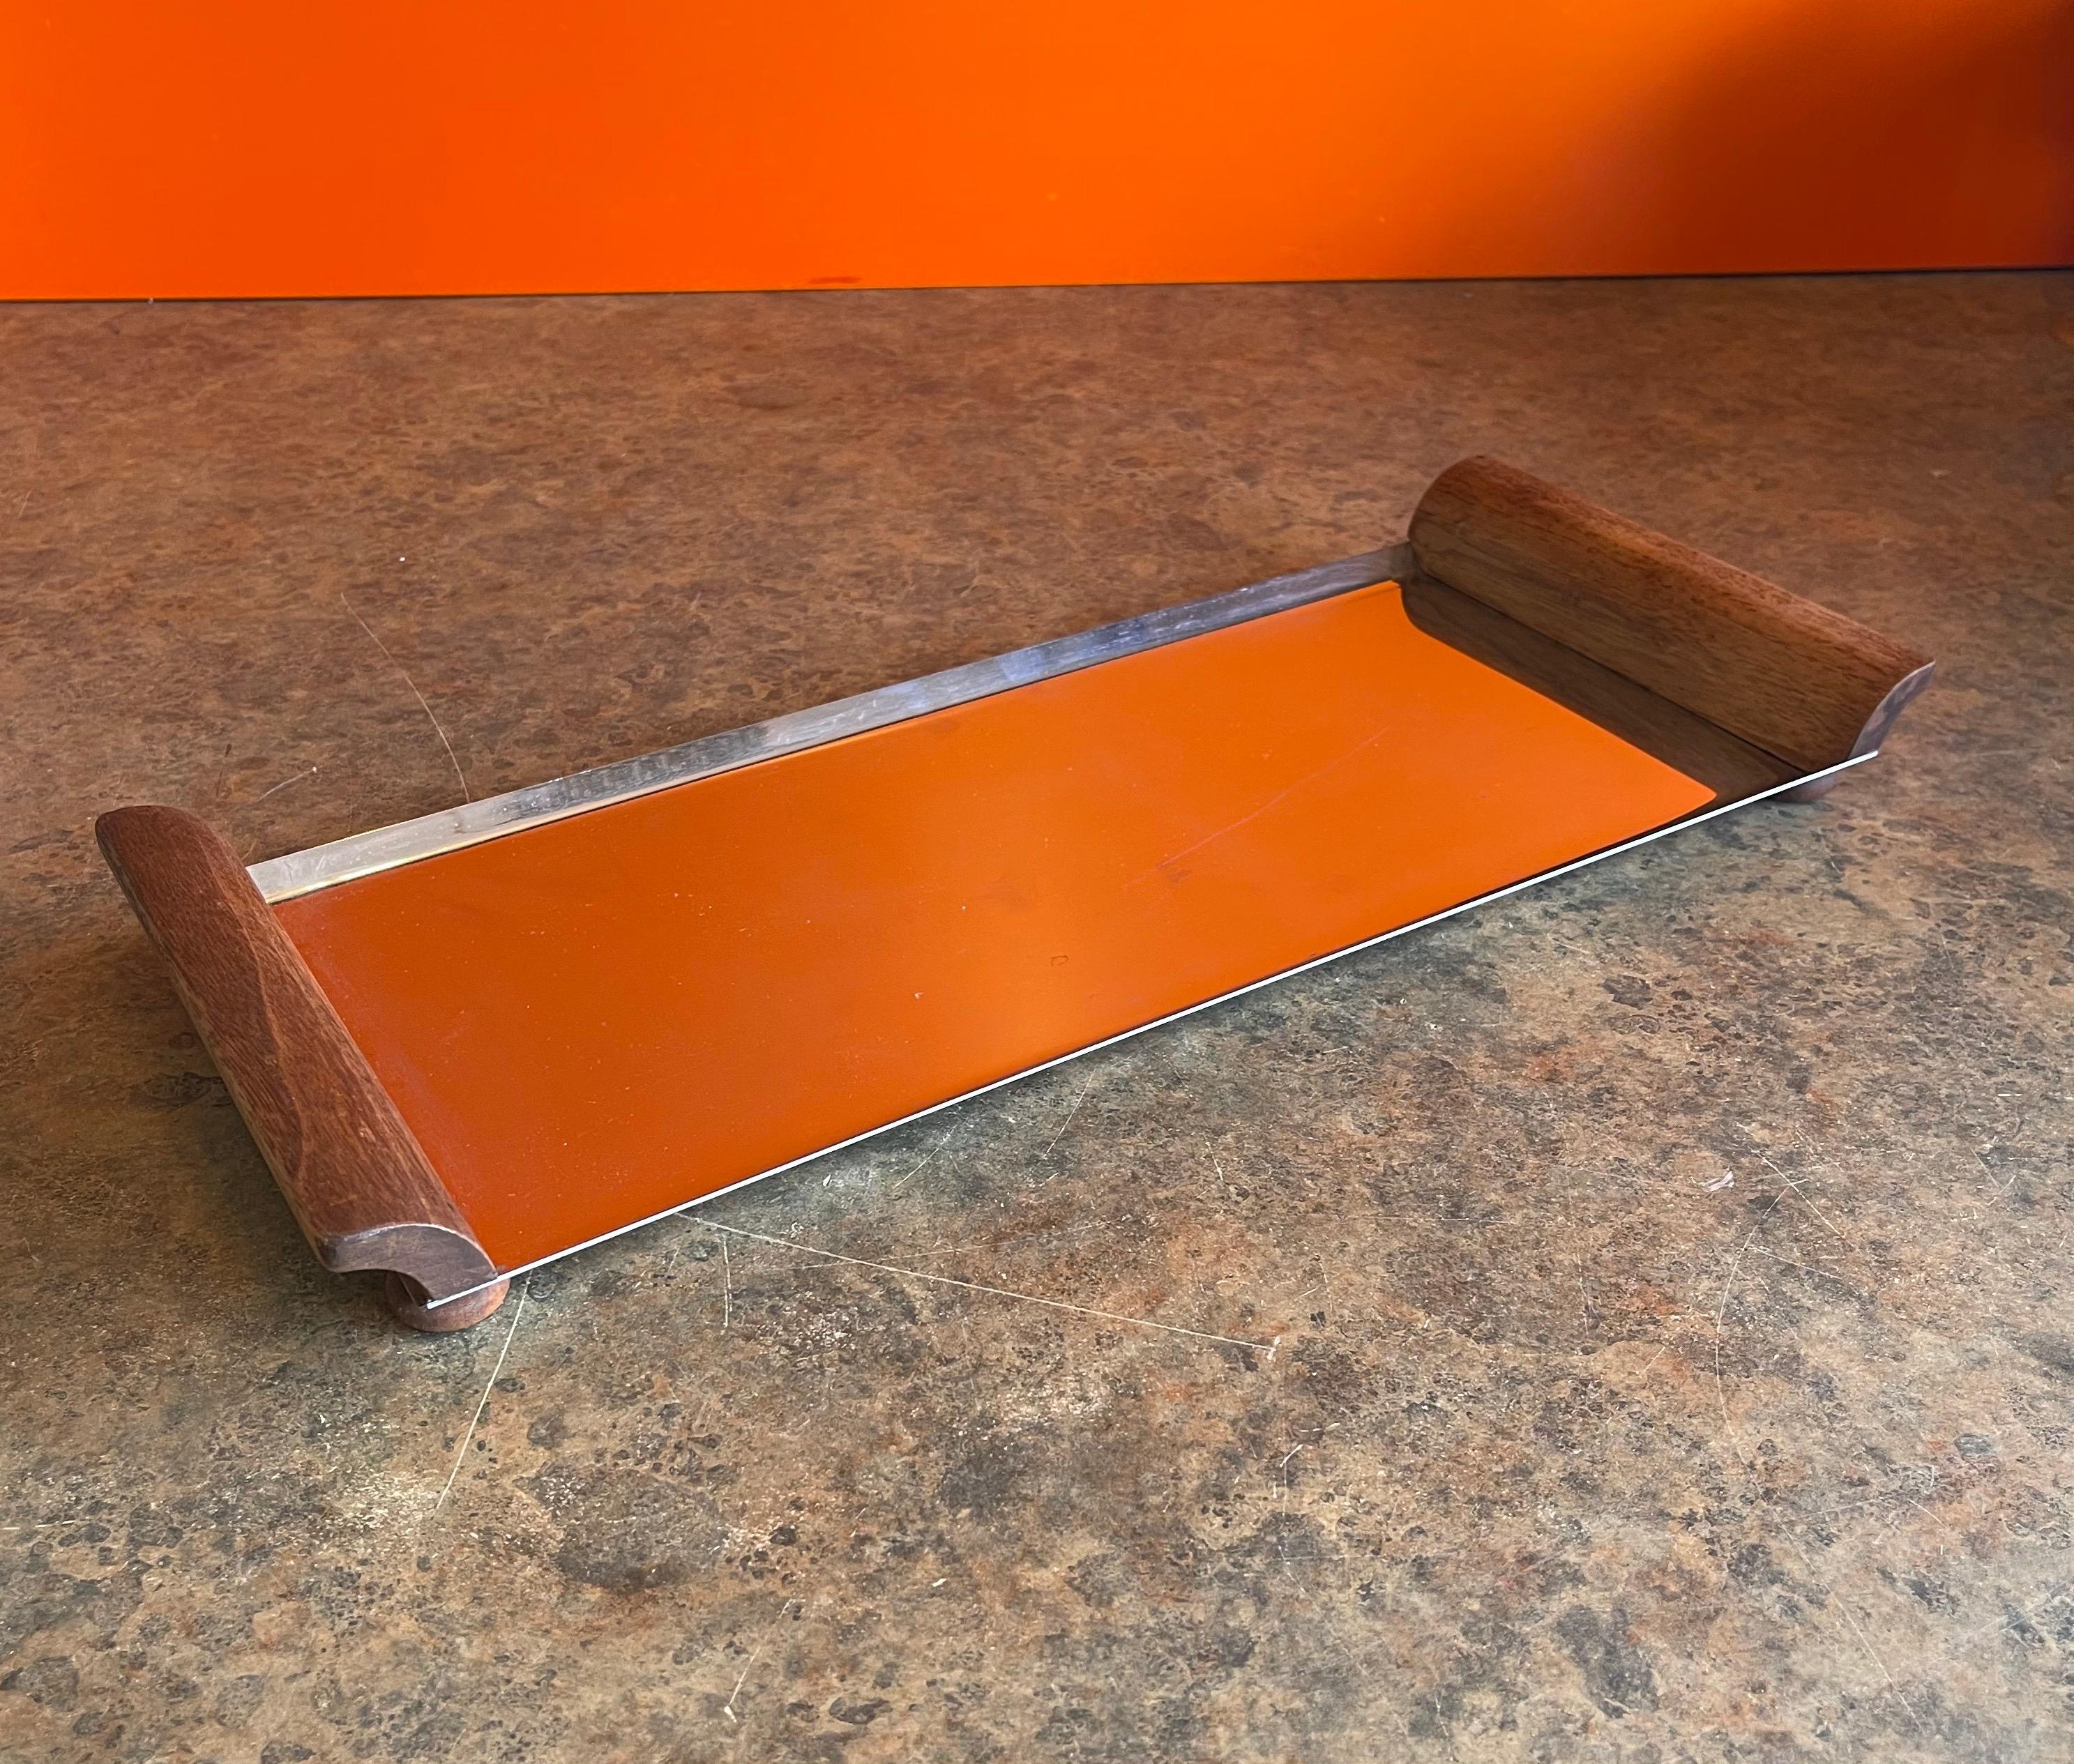 A nice MCM stainless steel serving tray with walnut handles, circa 1960s. The tray is in good vintage condition and measures 19